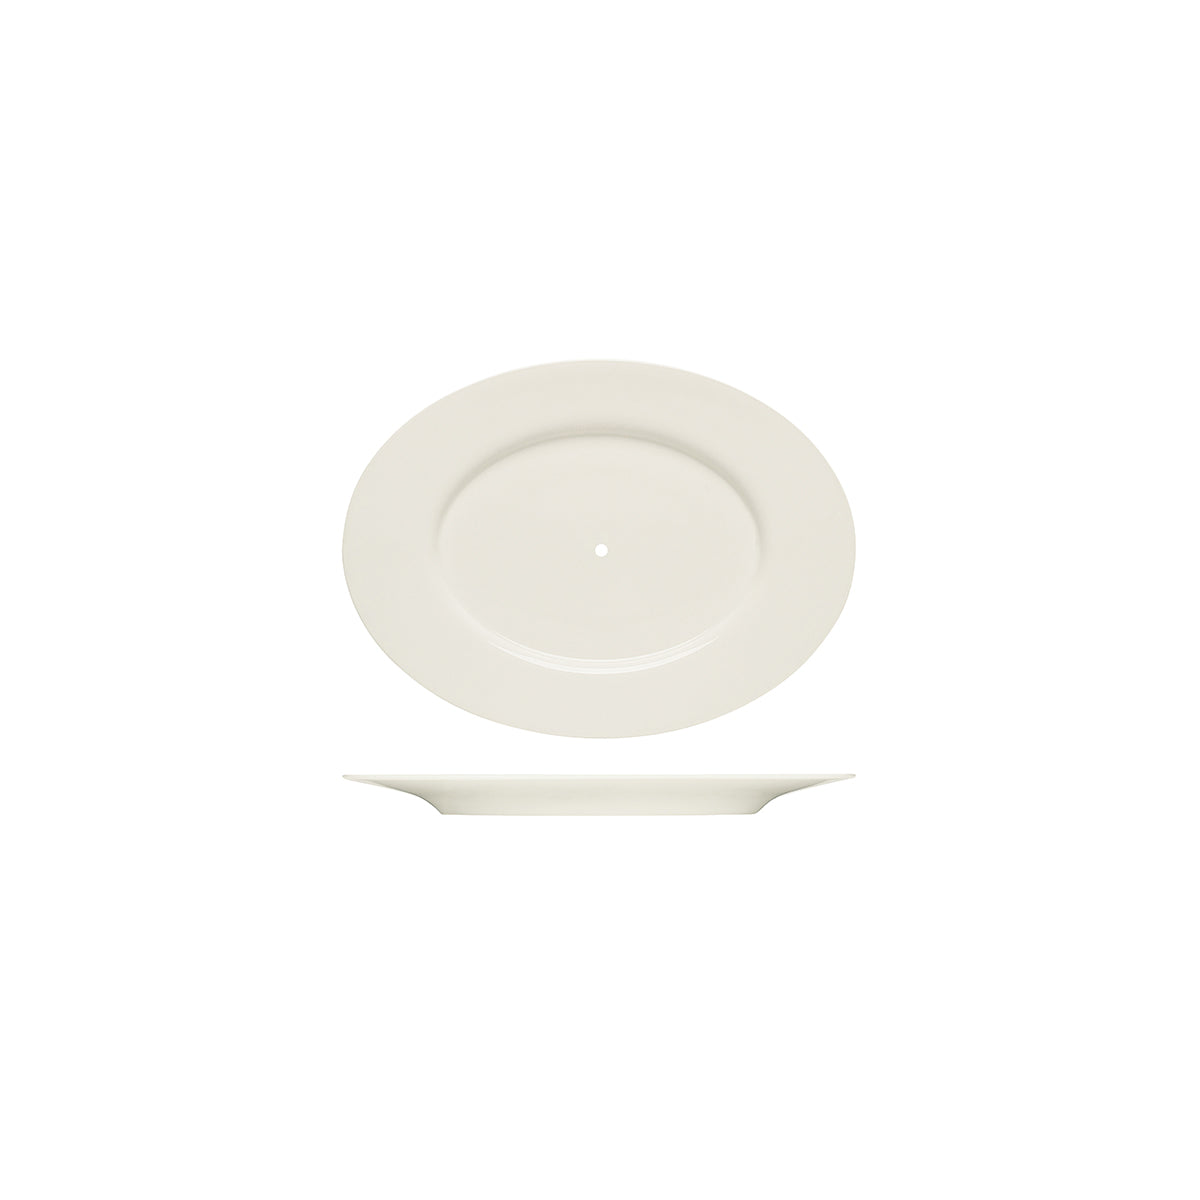 BHS6697203 Bauscher Bauscher Purity Oval Platter with Wide Rim 240x175mm To Suit Serving Stand Tomkin Australia Hospitality Supplies